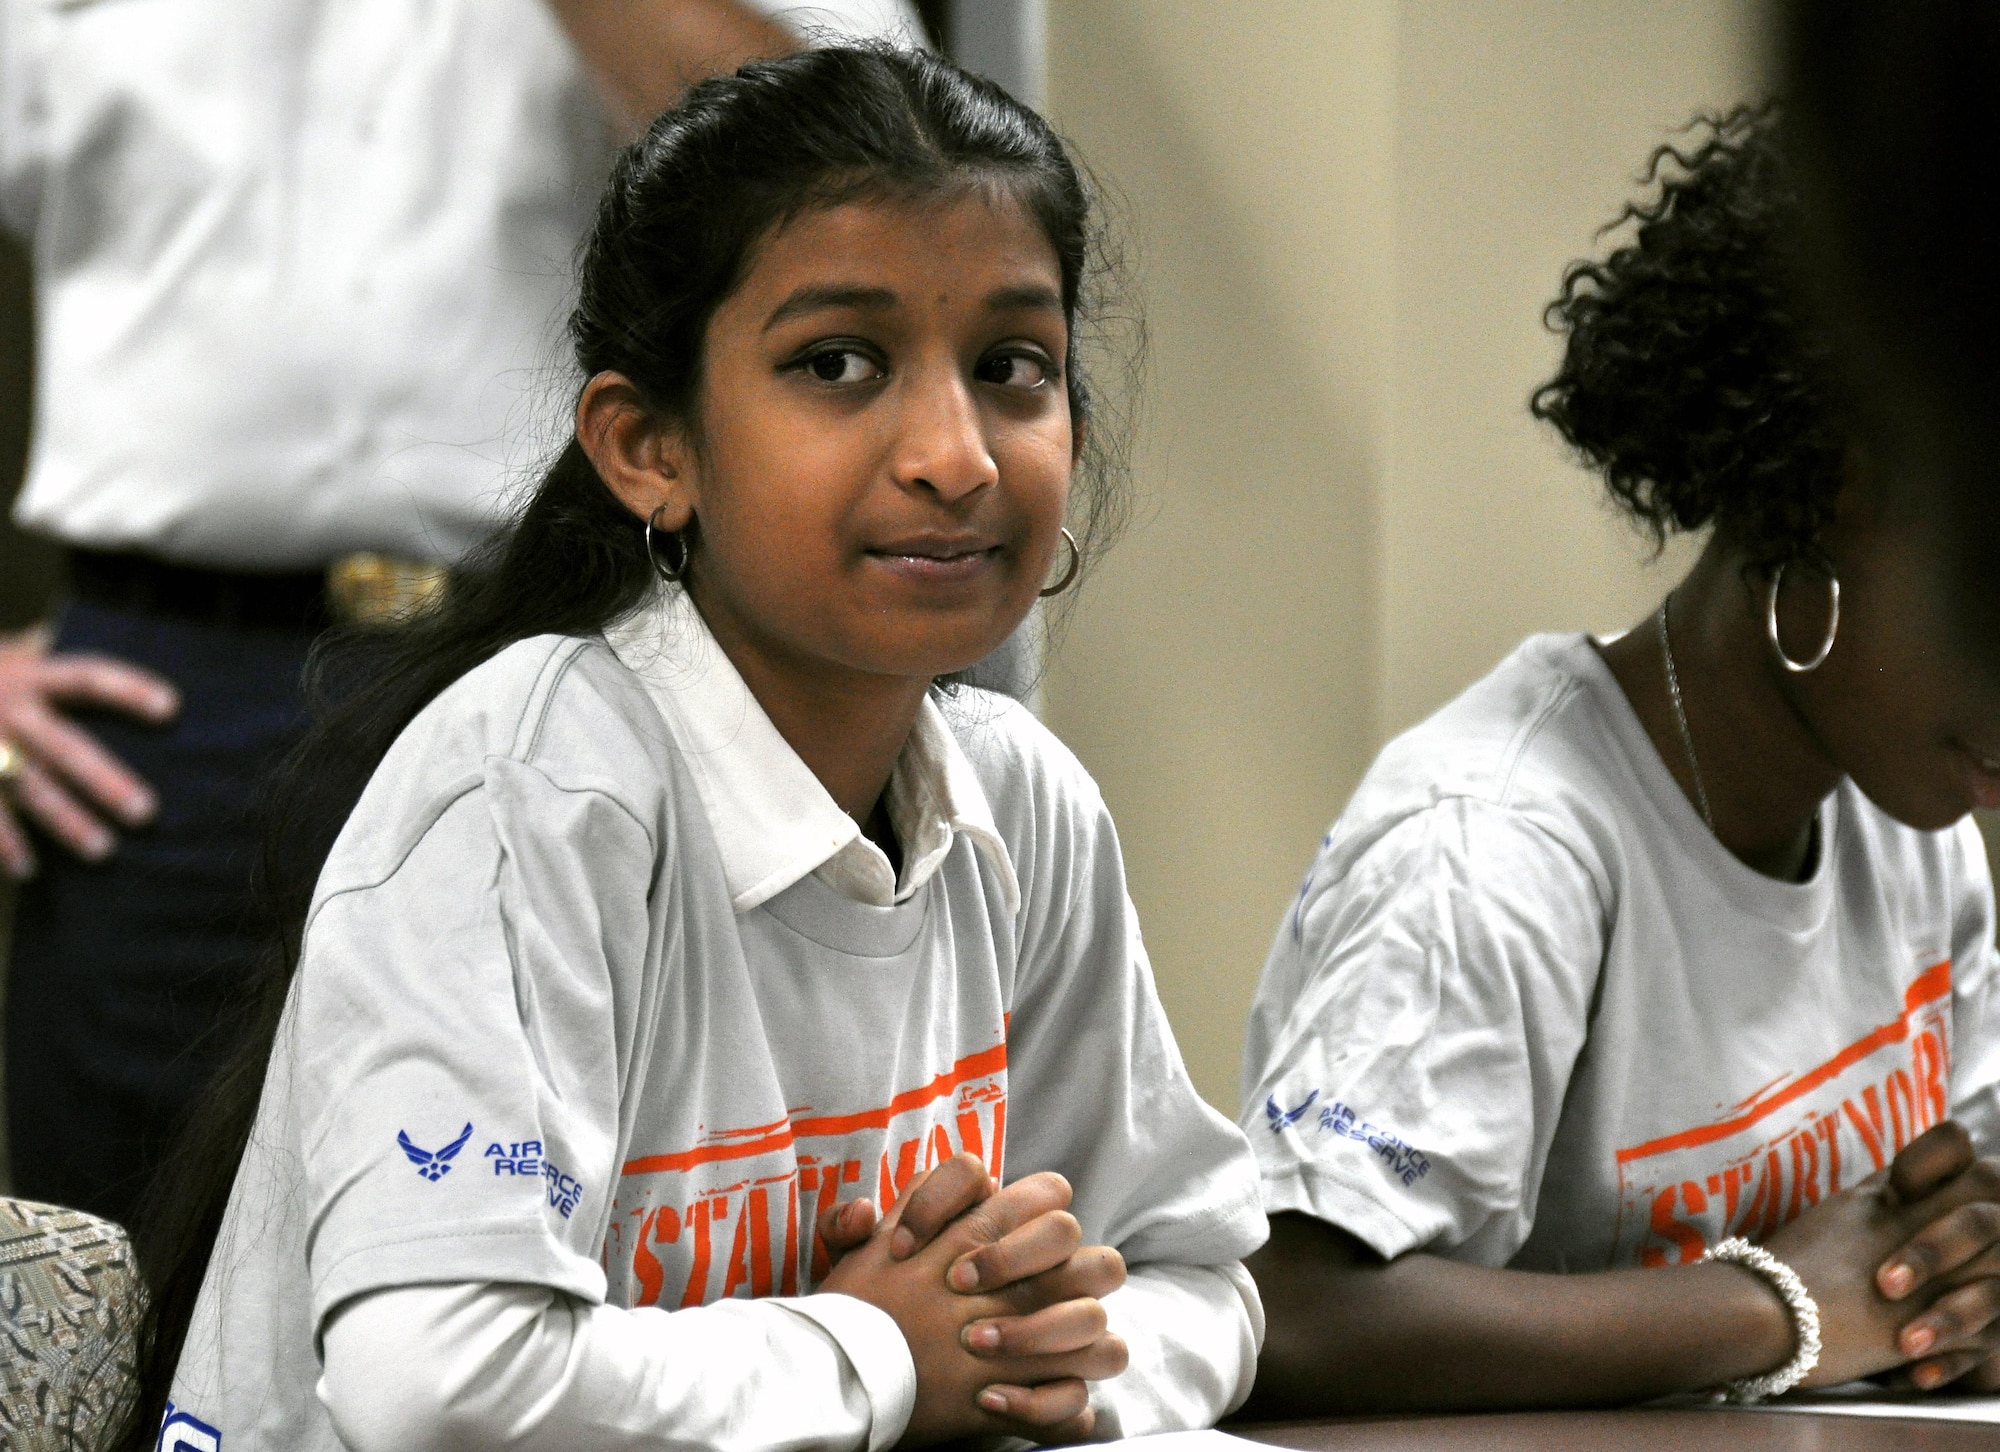 Ananya Achari, a student at Bright Star Elementary in Douglasville, Ga. listens intently to Maj. Gen. Stayce Harris, 22nd Air Force commander, at the 22nd AF headquarters at Dobbins Air Reserve Base, Ga., Feb. 7, 2015. Ten students from Bright Star visited the installation to interview Harris for Black History month. (U.S. Air Force photo/Senior Airman Daniel Phelps)